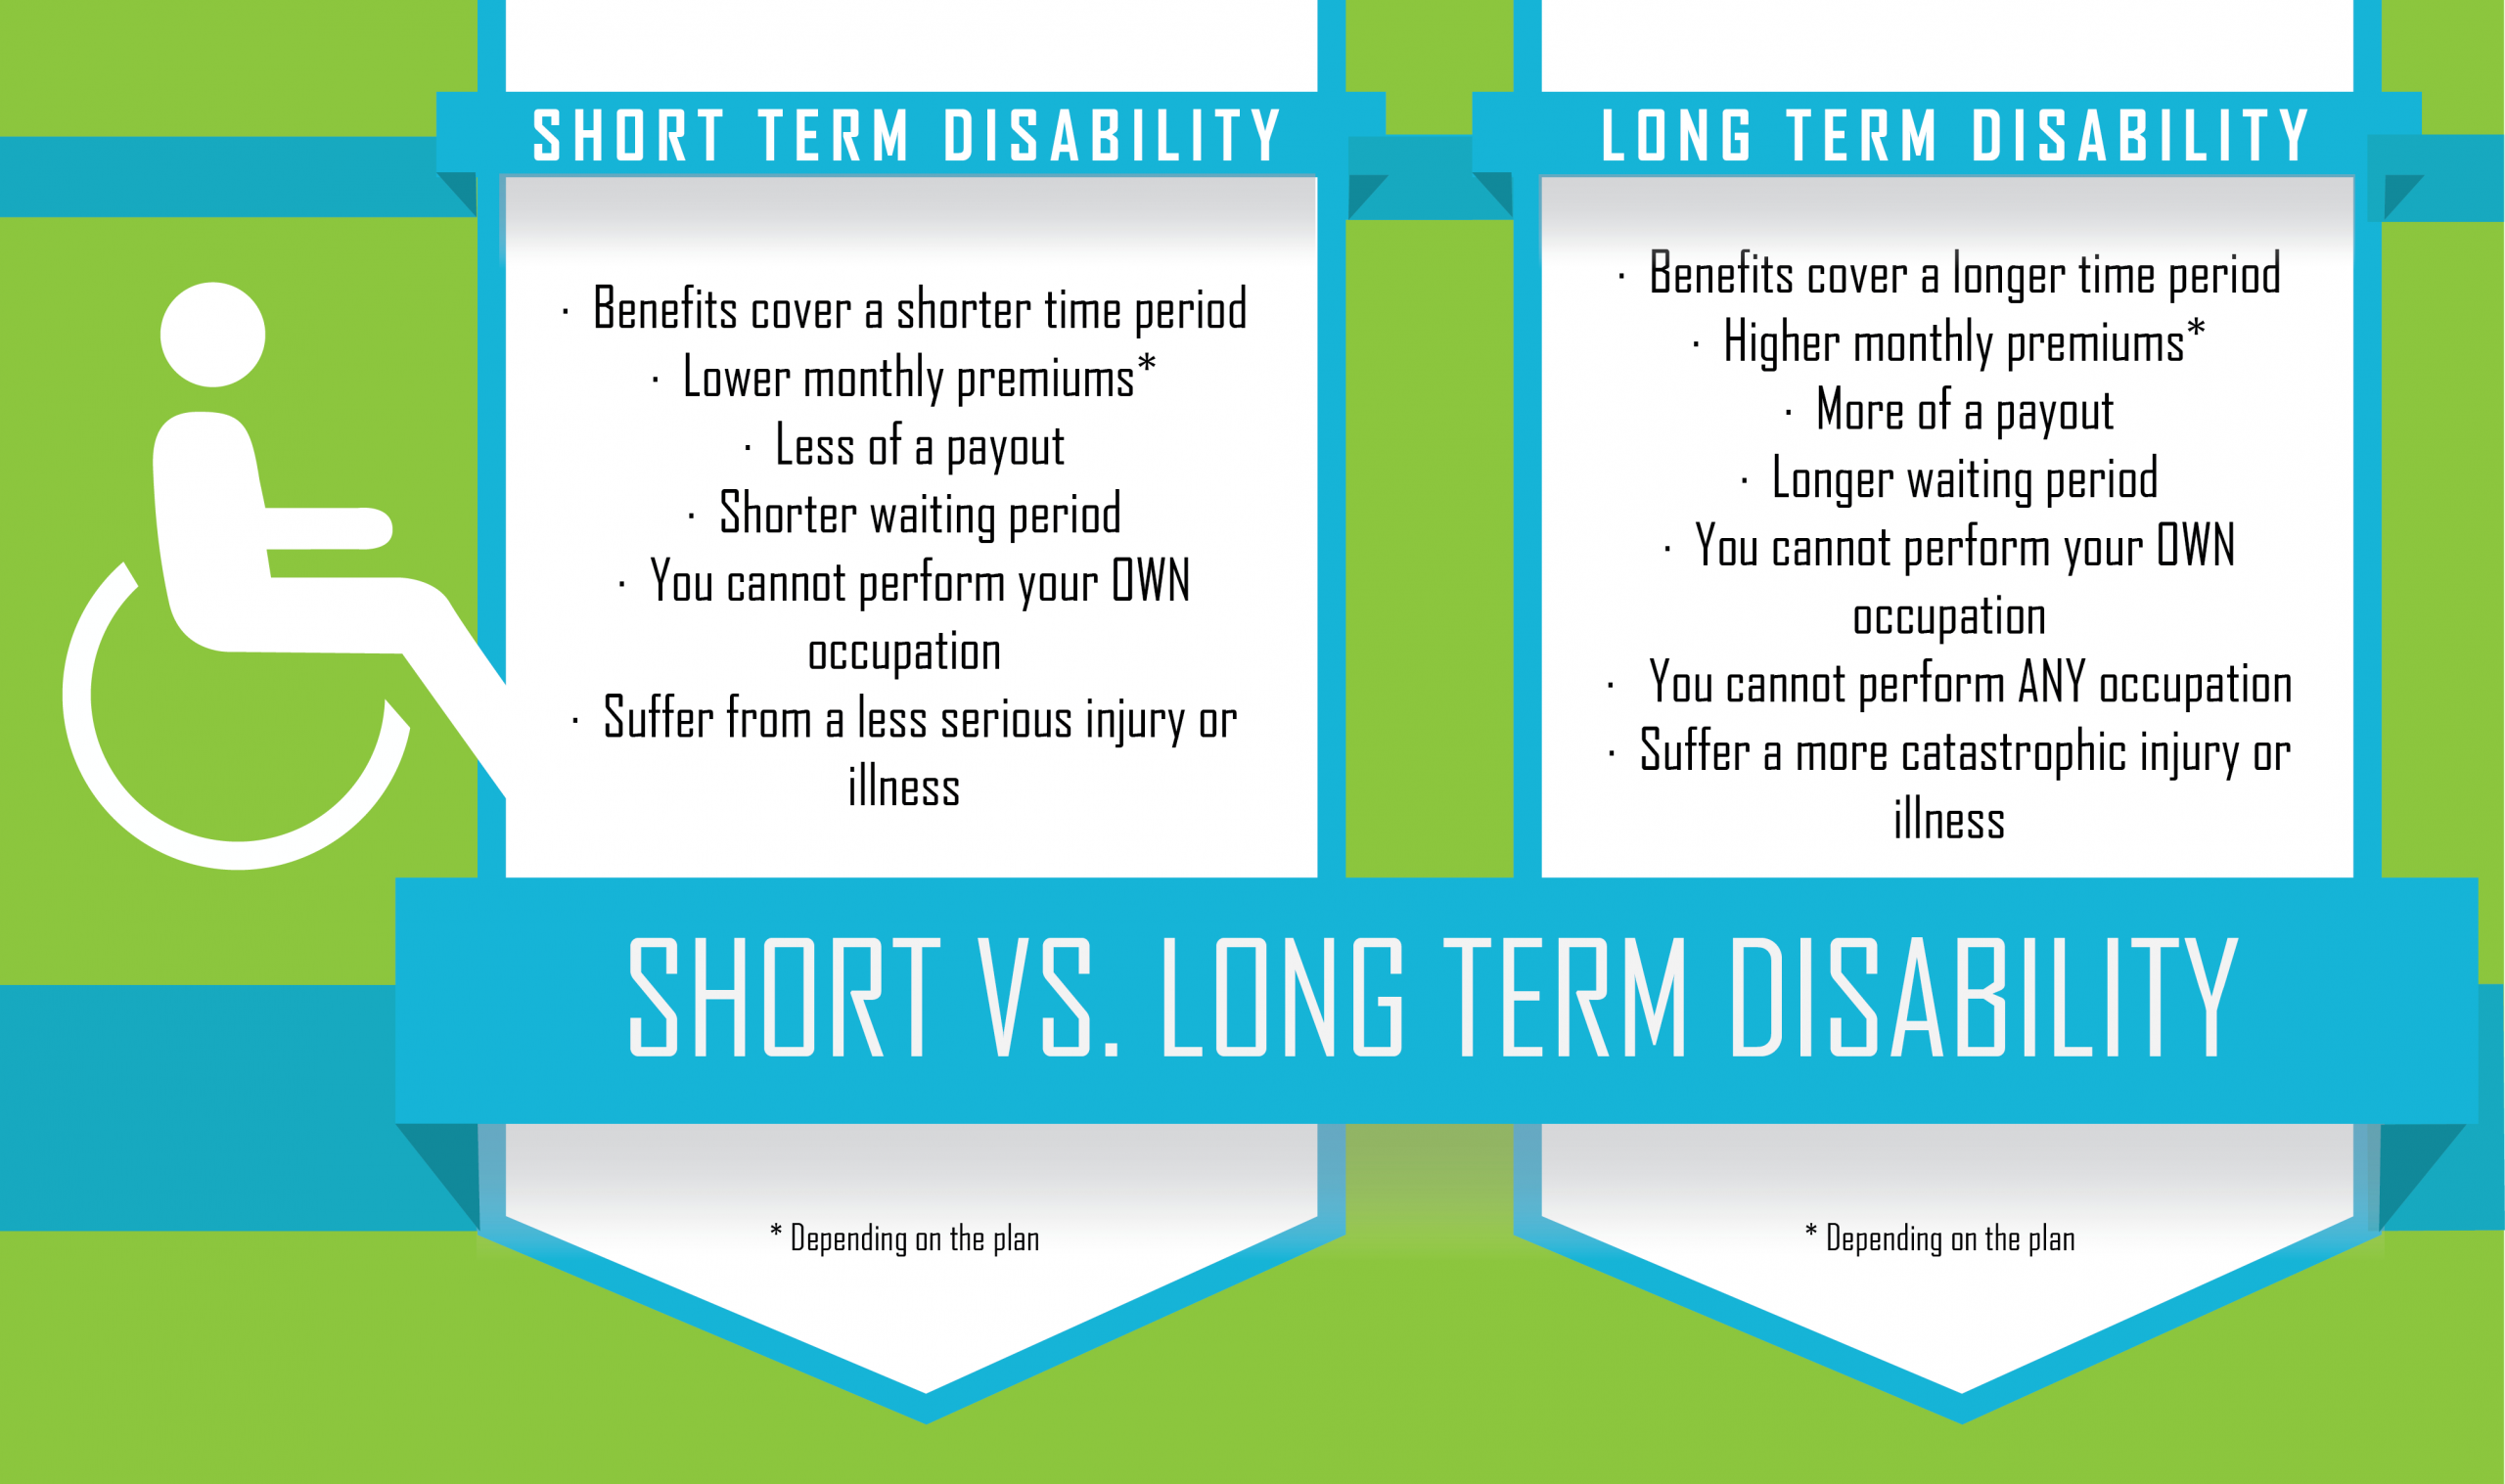 Short Term And Long Term Disability Comparison With Images in size 4039 X 2394